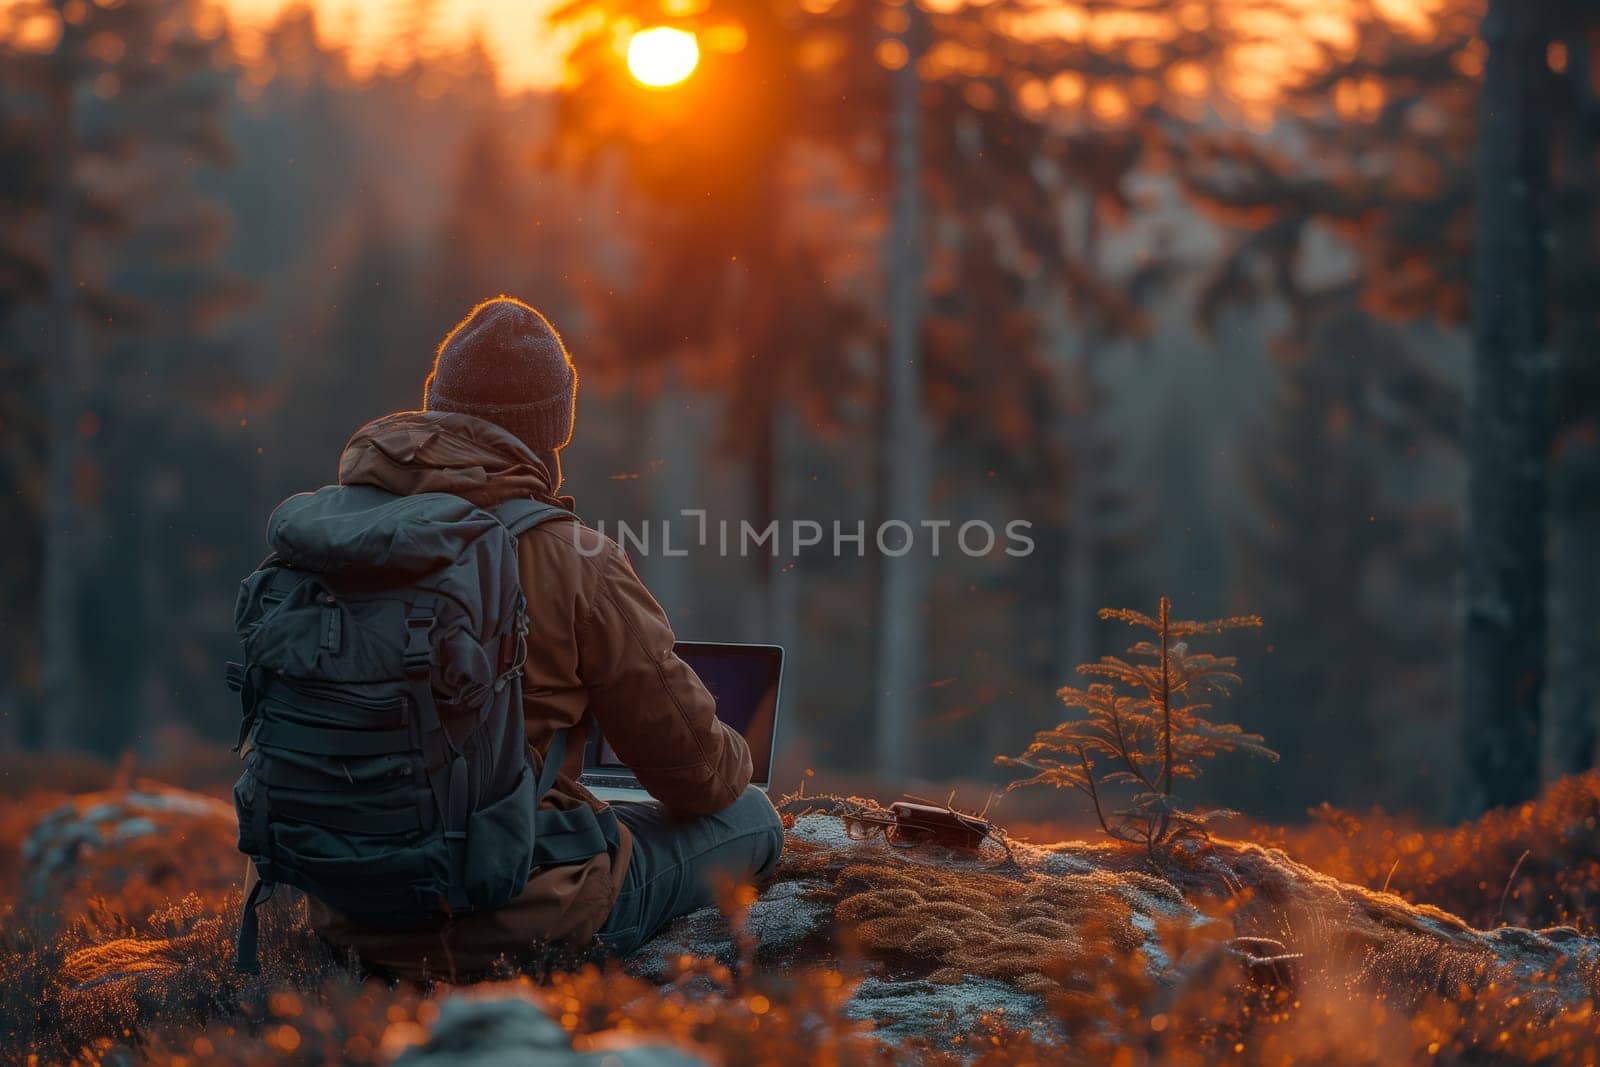 A man with a backpack sits on a rock in the woodland, surrounded by trees and plants. The sunlight filters through the leaves as he works on his laptop in the natural landscape